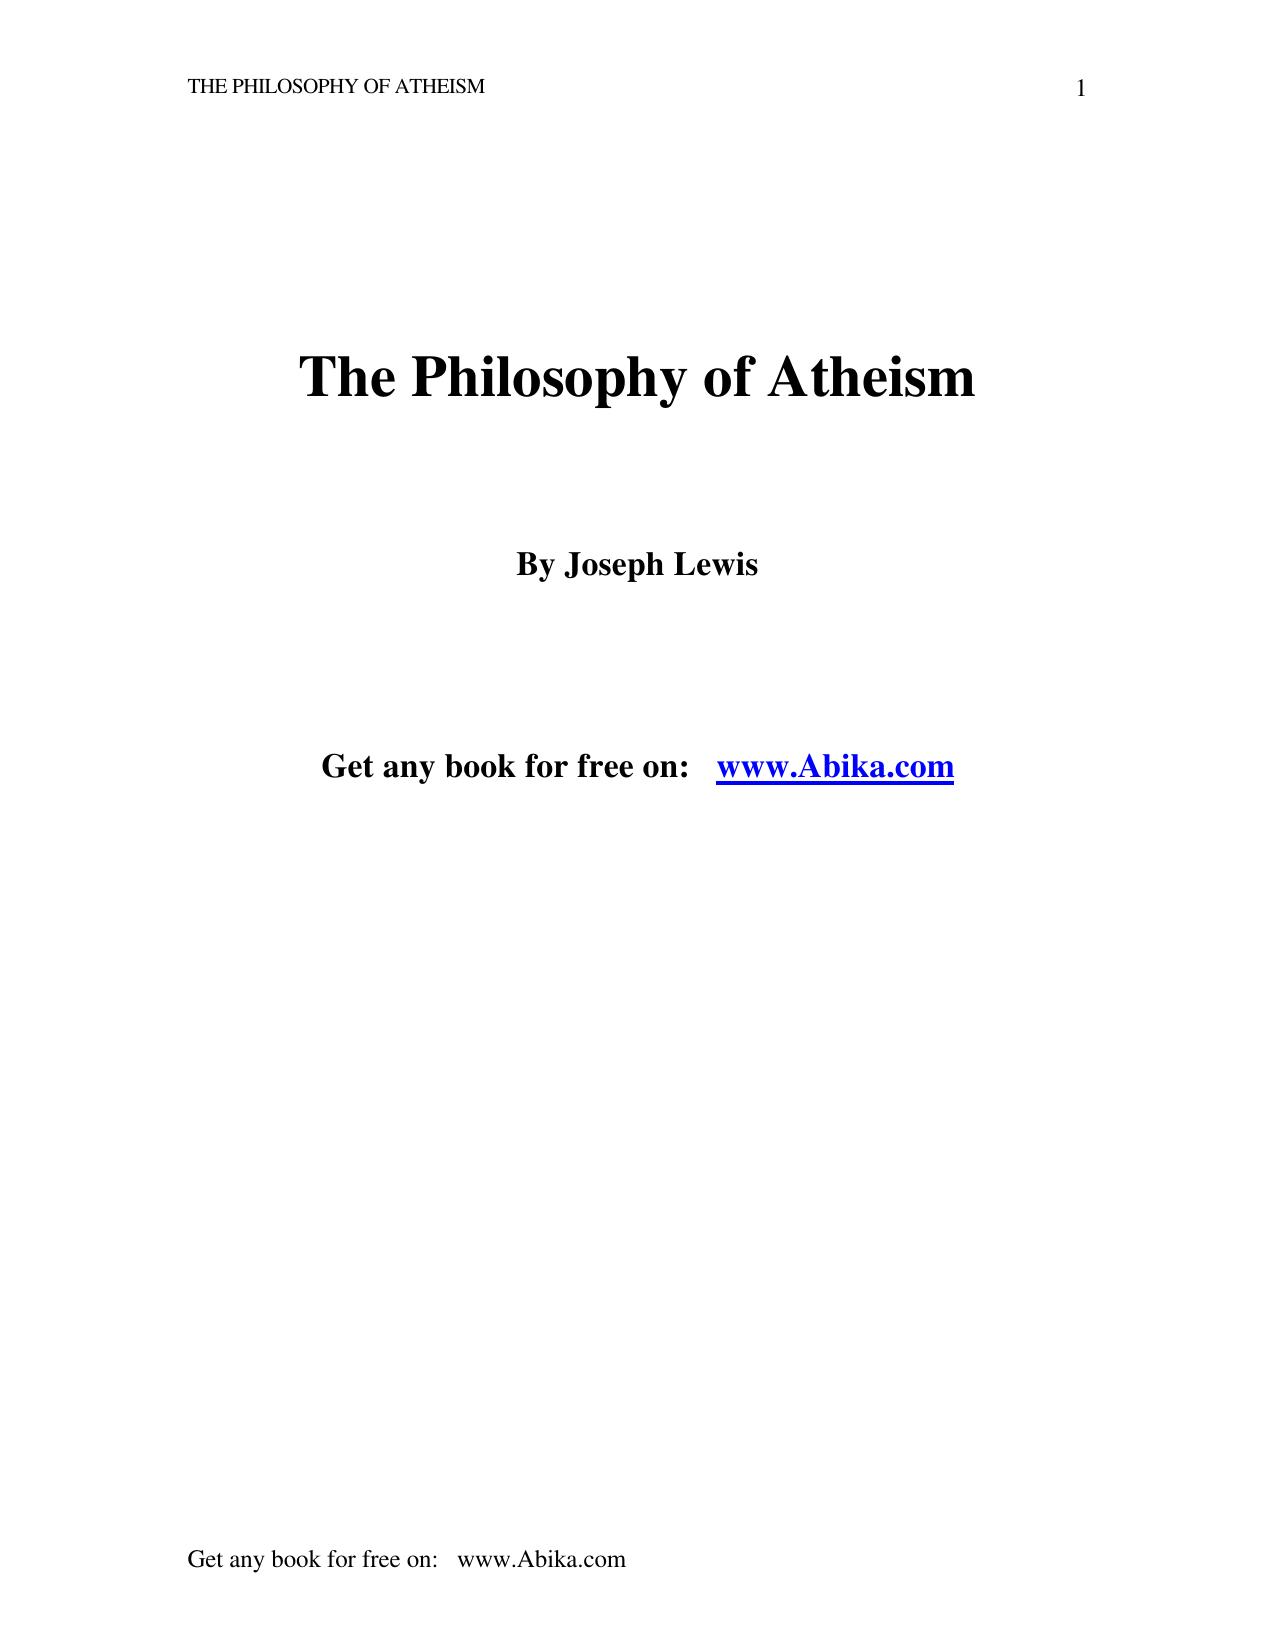 The Philosophy of Atheism - Address